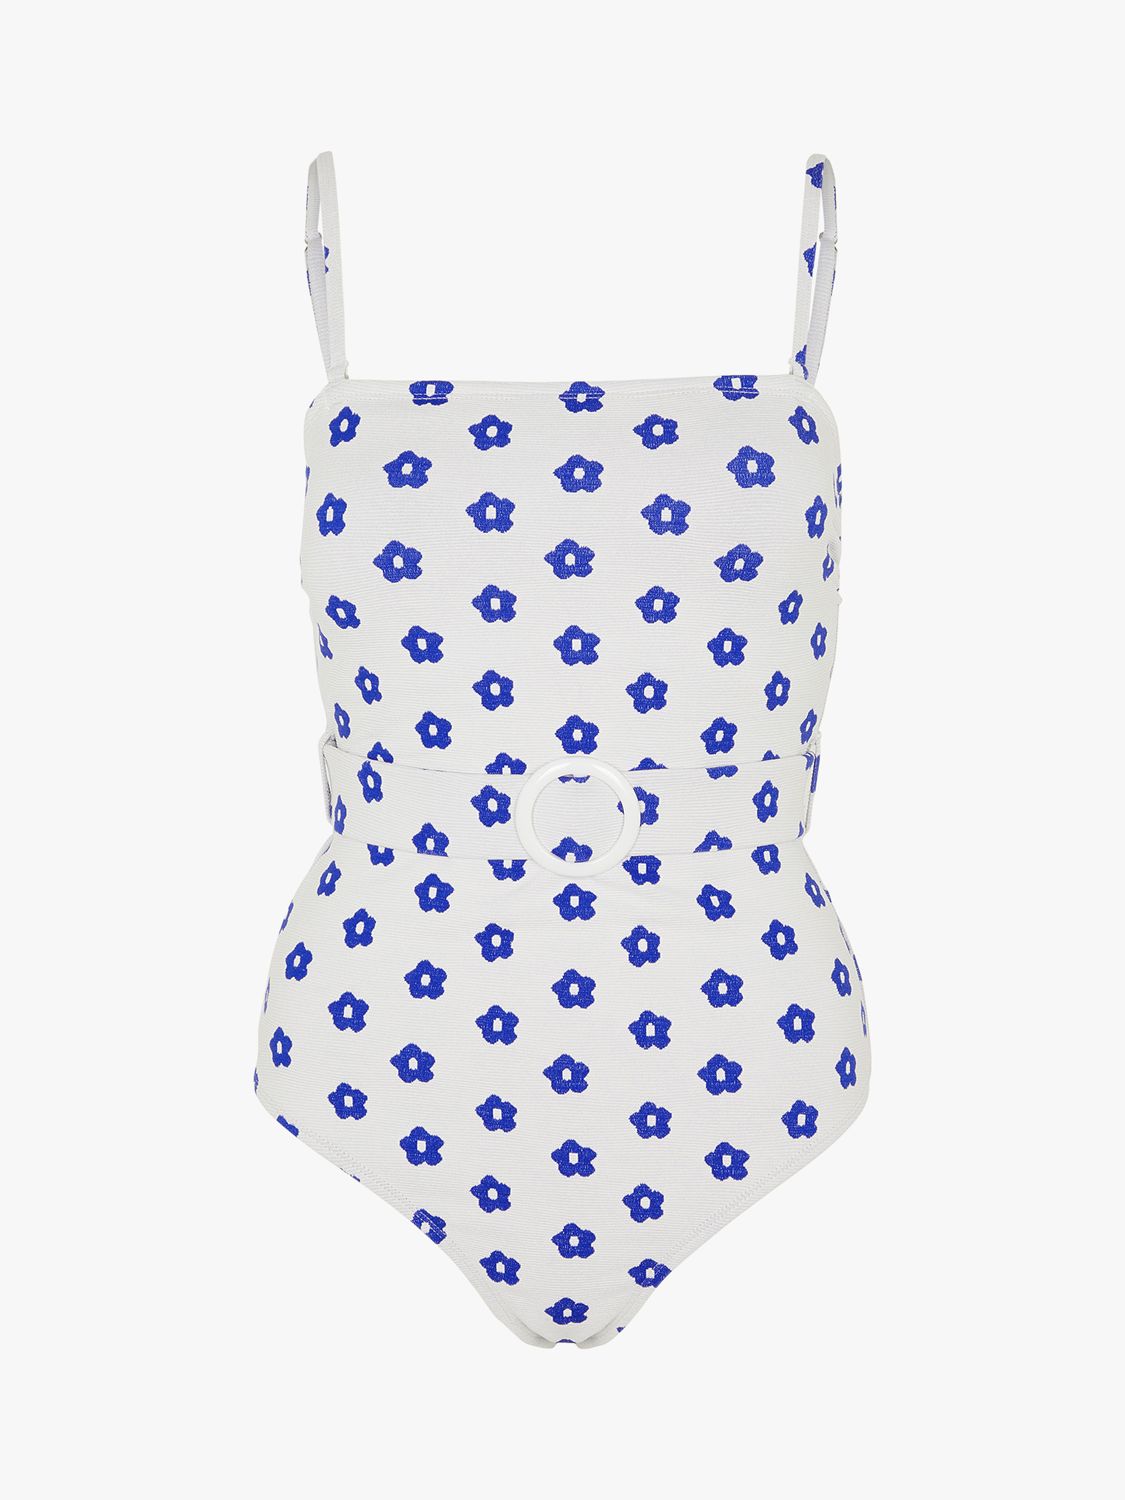 Accessorize Daisy Belted Swimsuit, White/Blue, 6